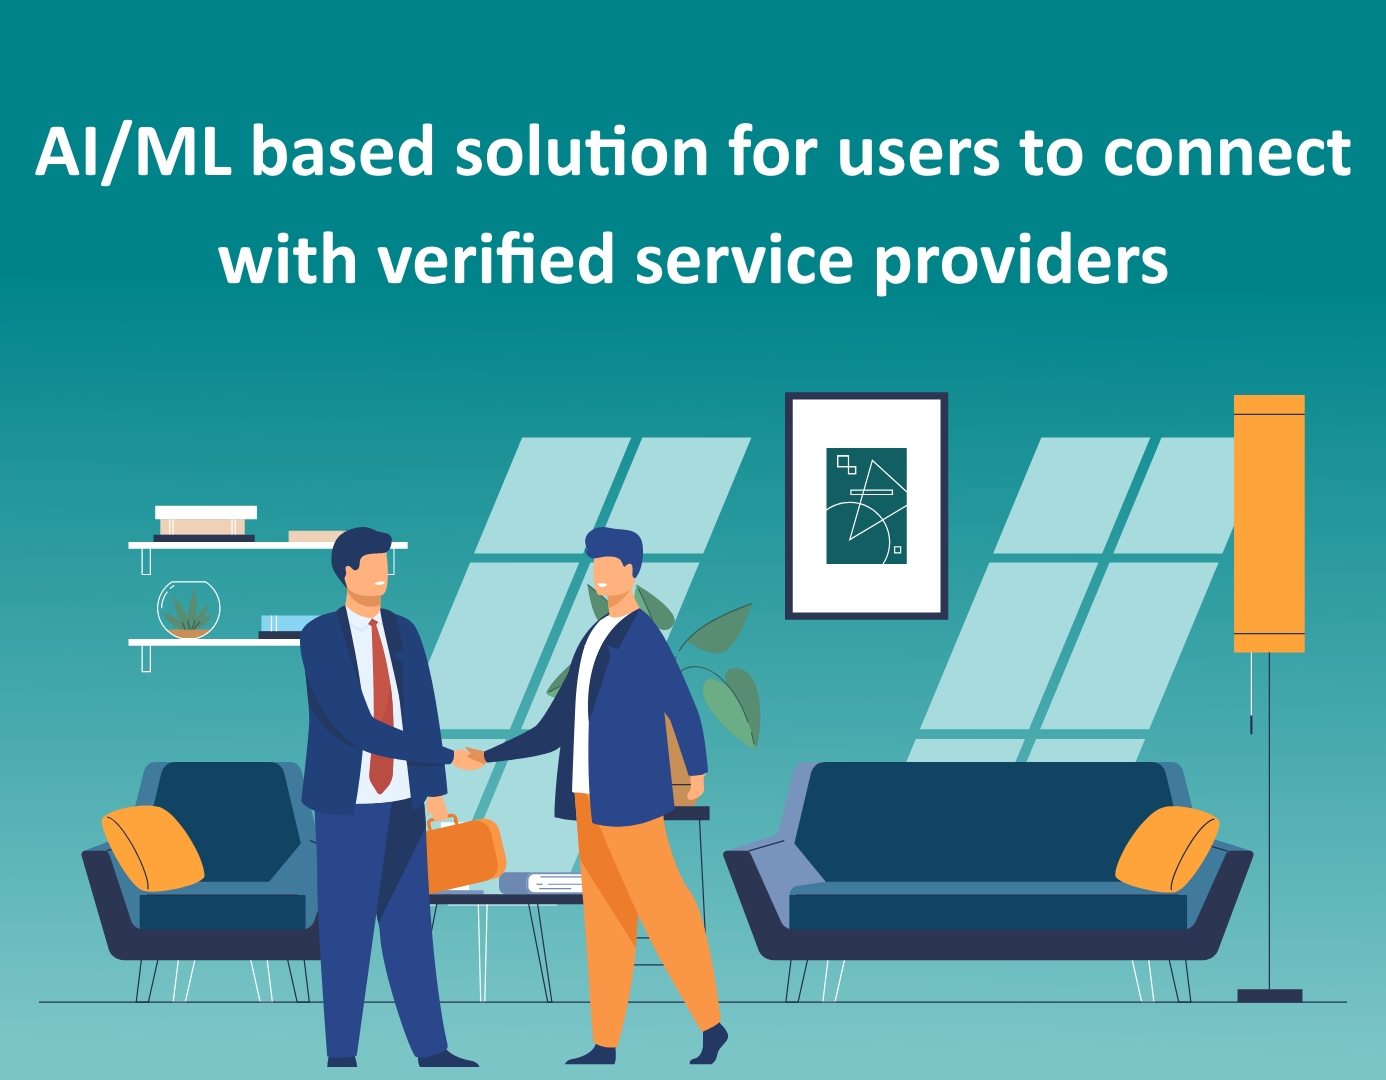 AI/ML based solution for users to connect with verified service providers